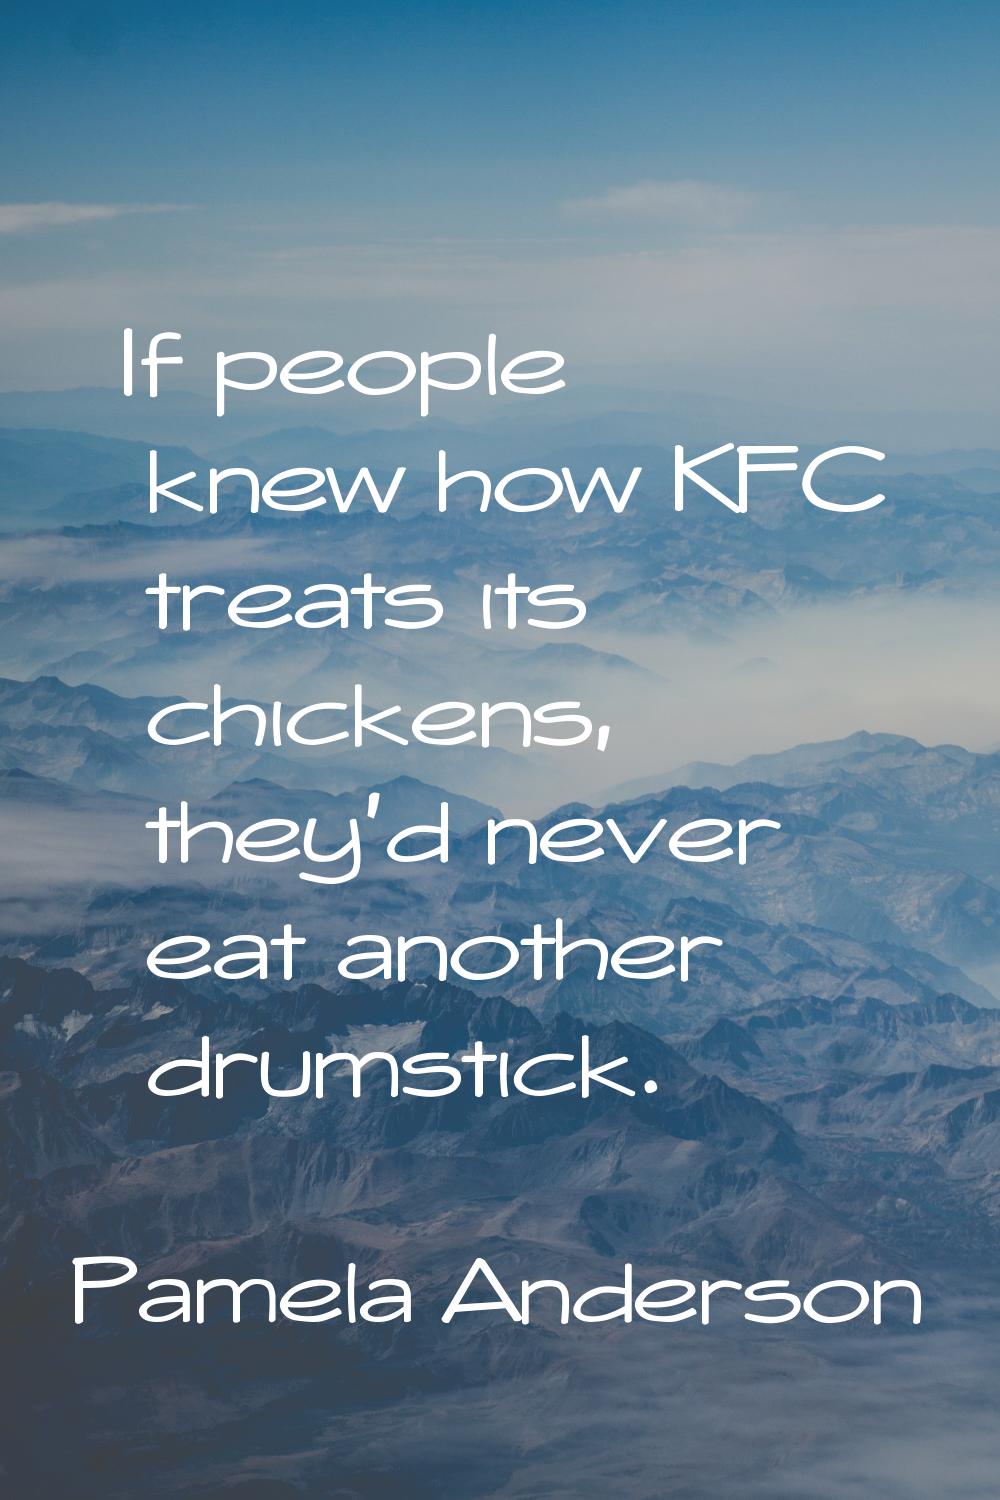 If people knew how KFC treats its chickens, they'd never eat another drumstick.